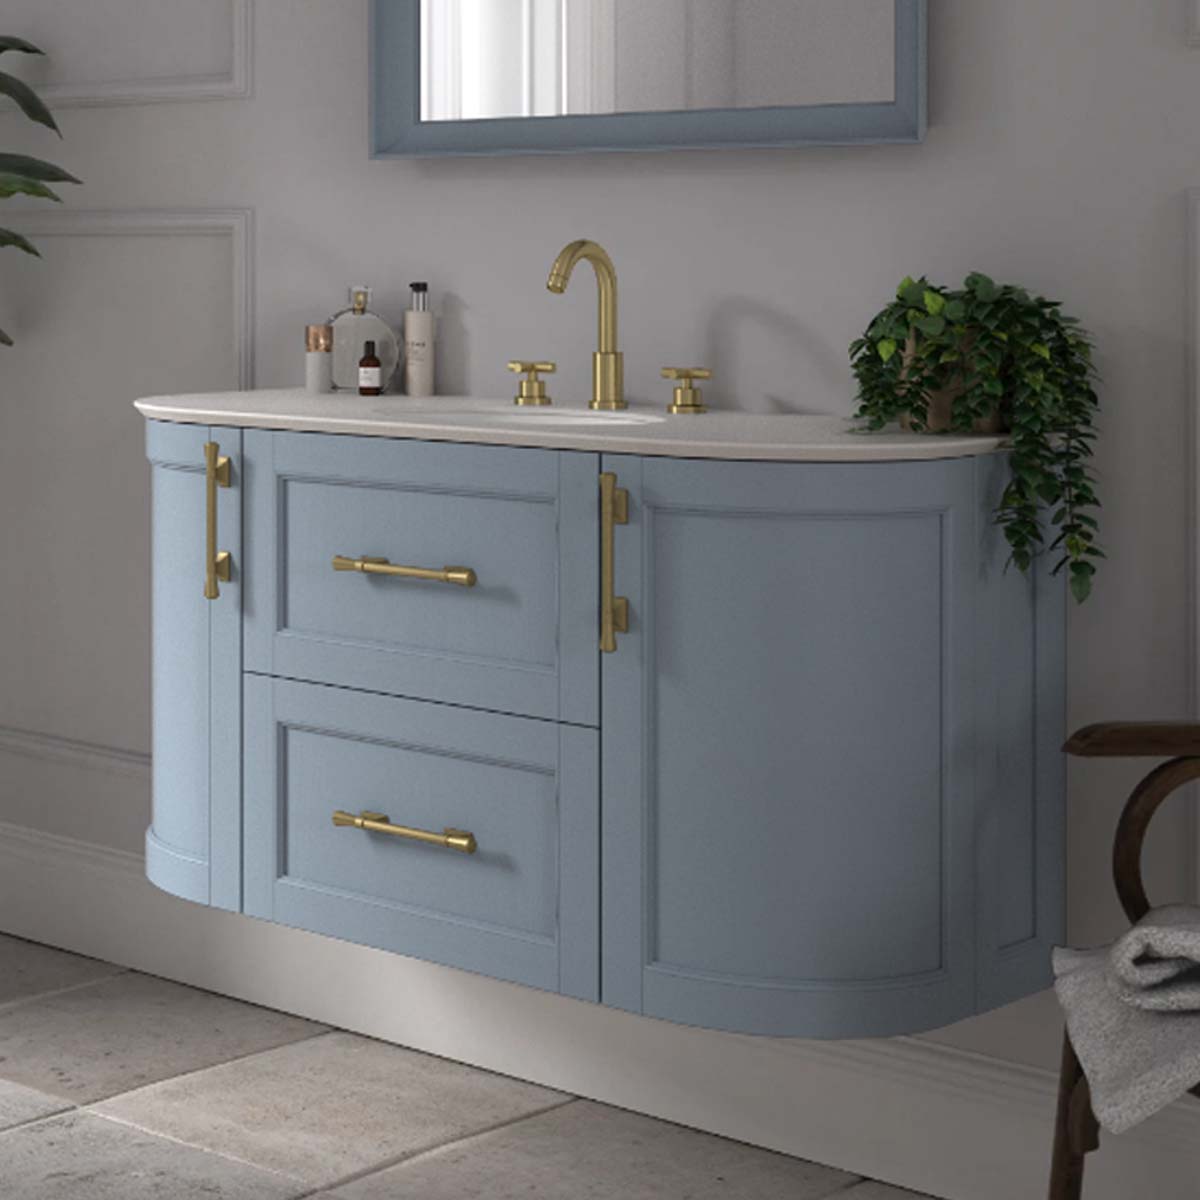 Utopia Roseberry Curved Wall Mounted Vanity Unit With Imperial White Worktop And Solid Surface Undermount Basin Blue Lagoon